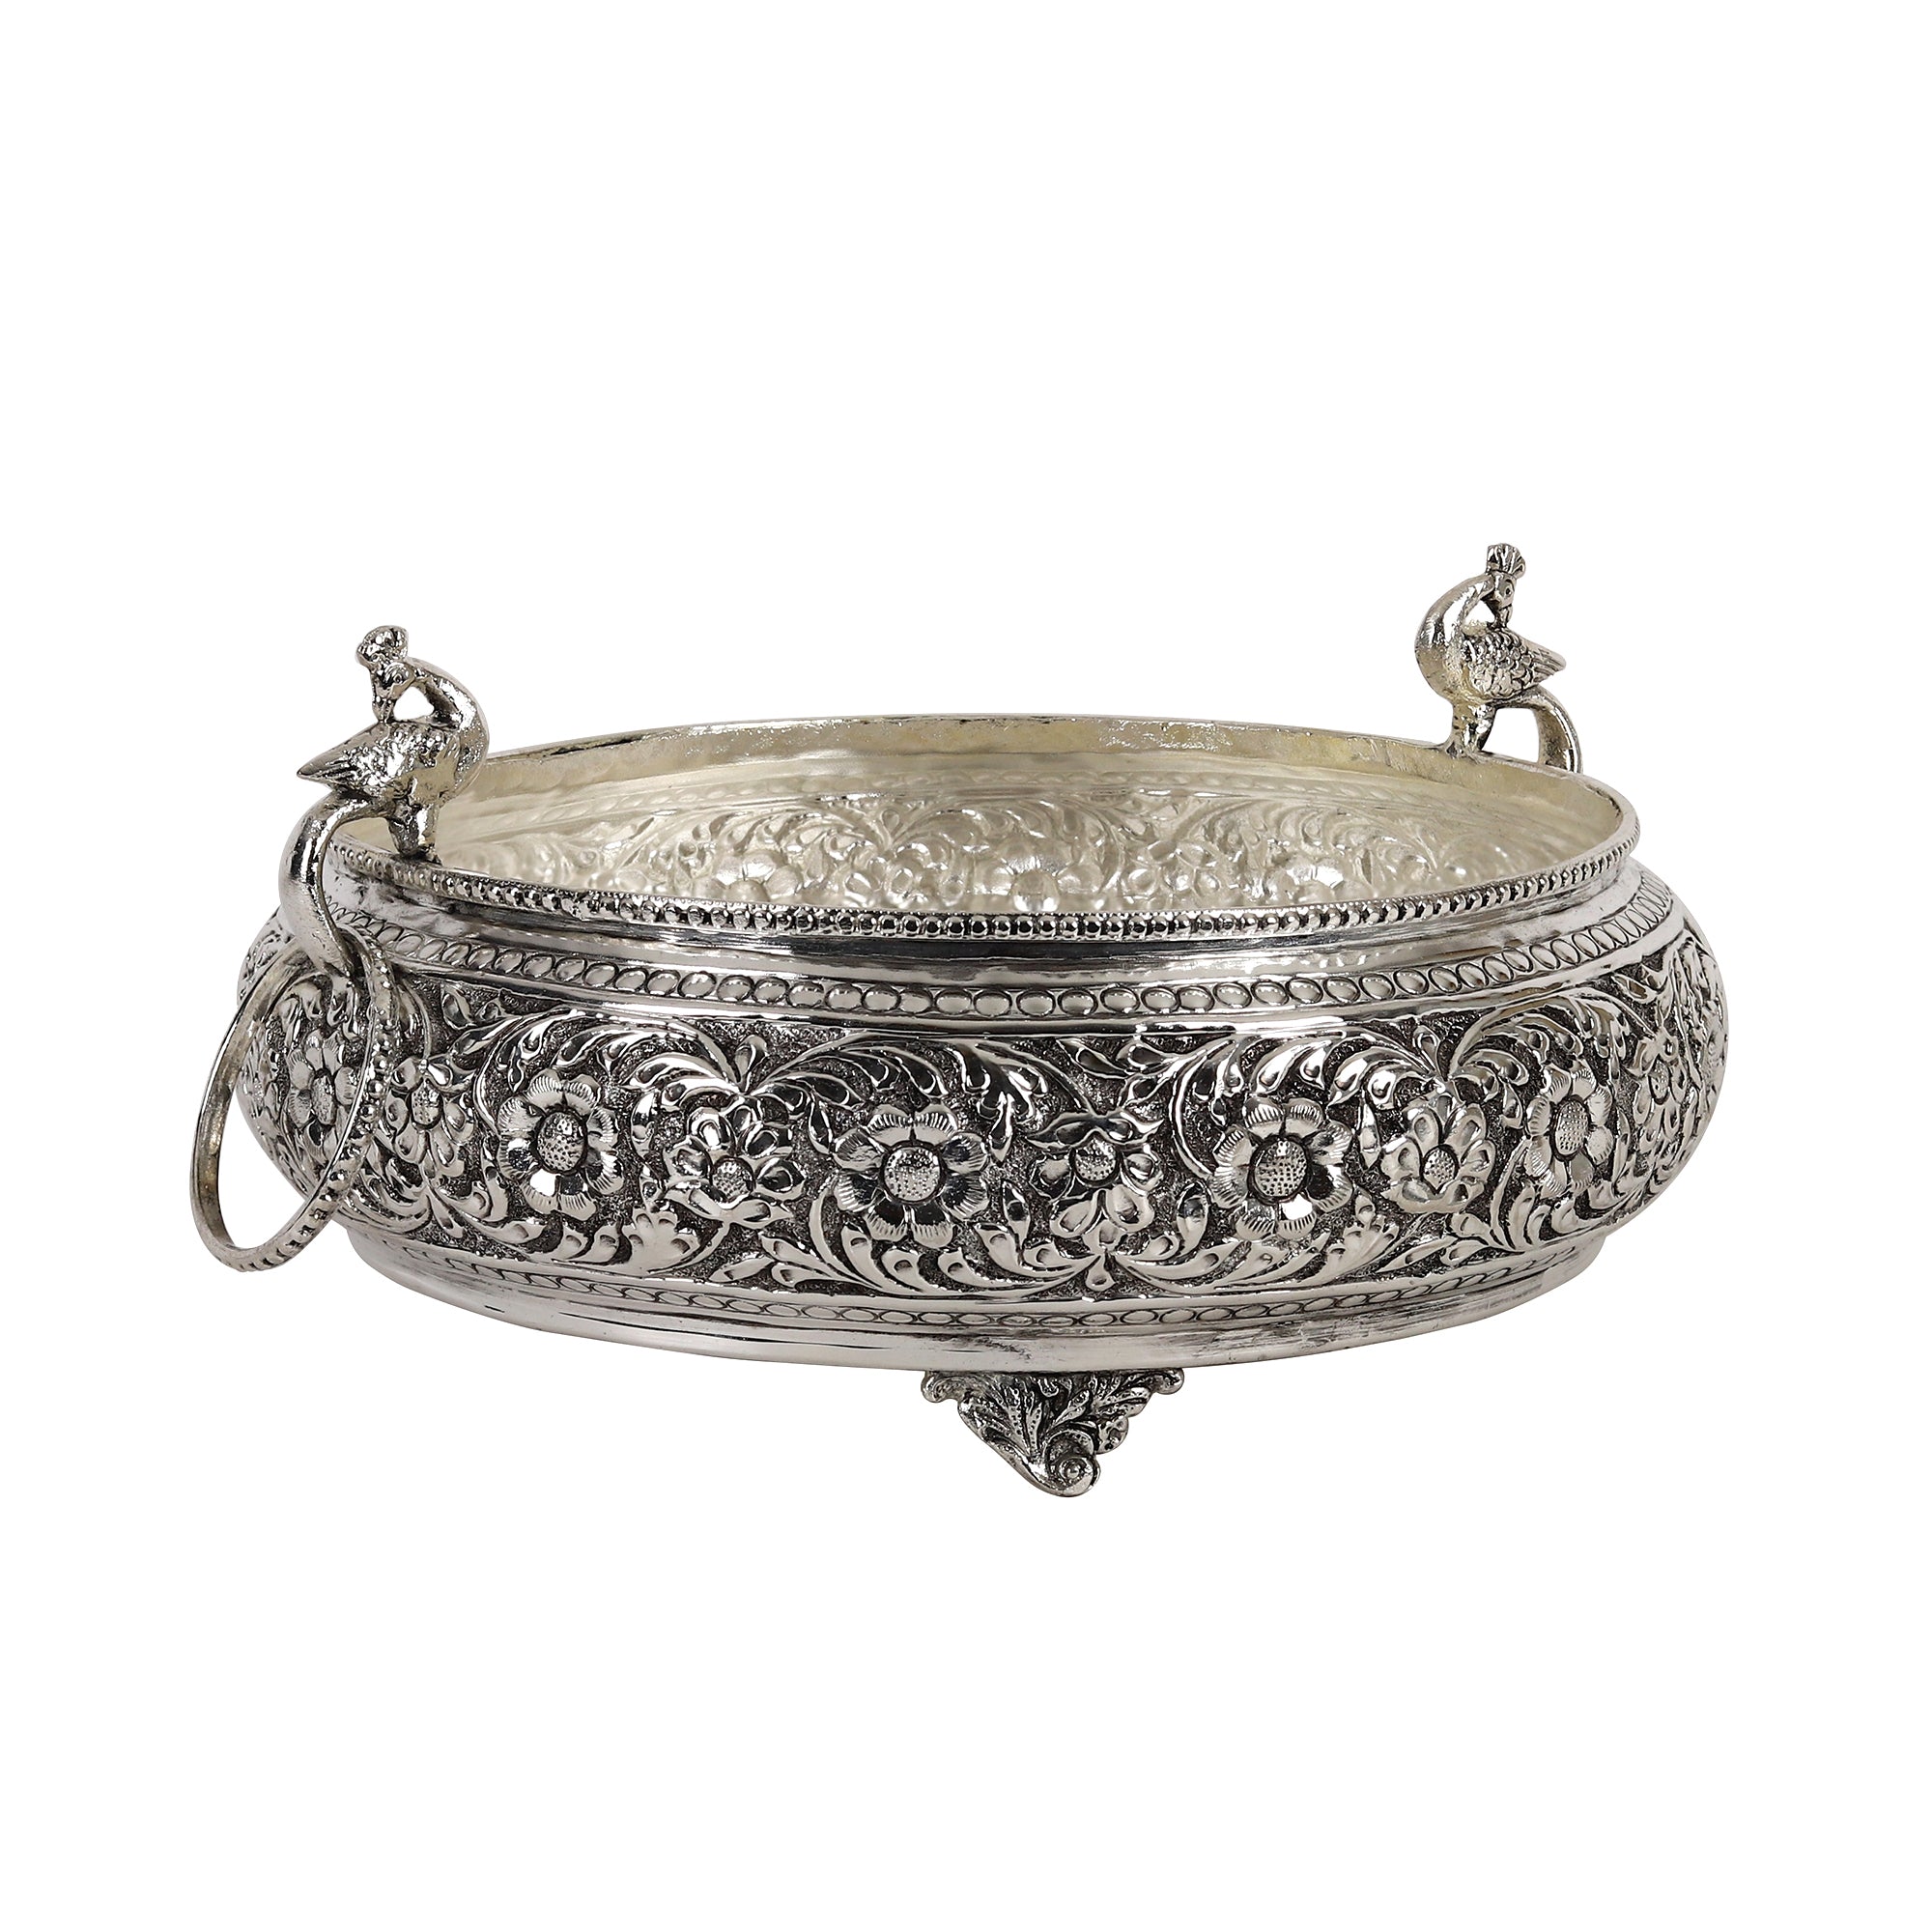 Ethnic Silver Plated Brass Urli Showpiece: A Timeless Blend of Elegance and Culture